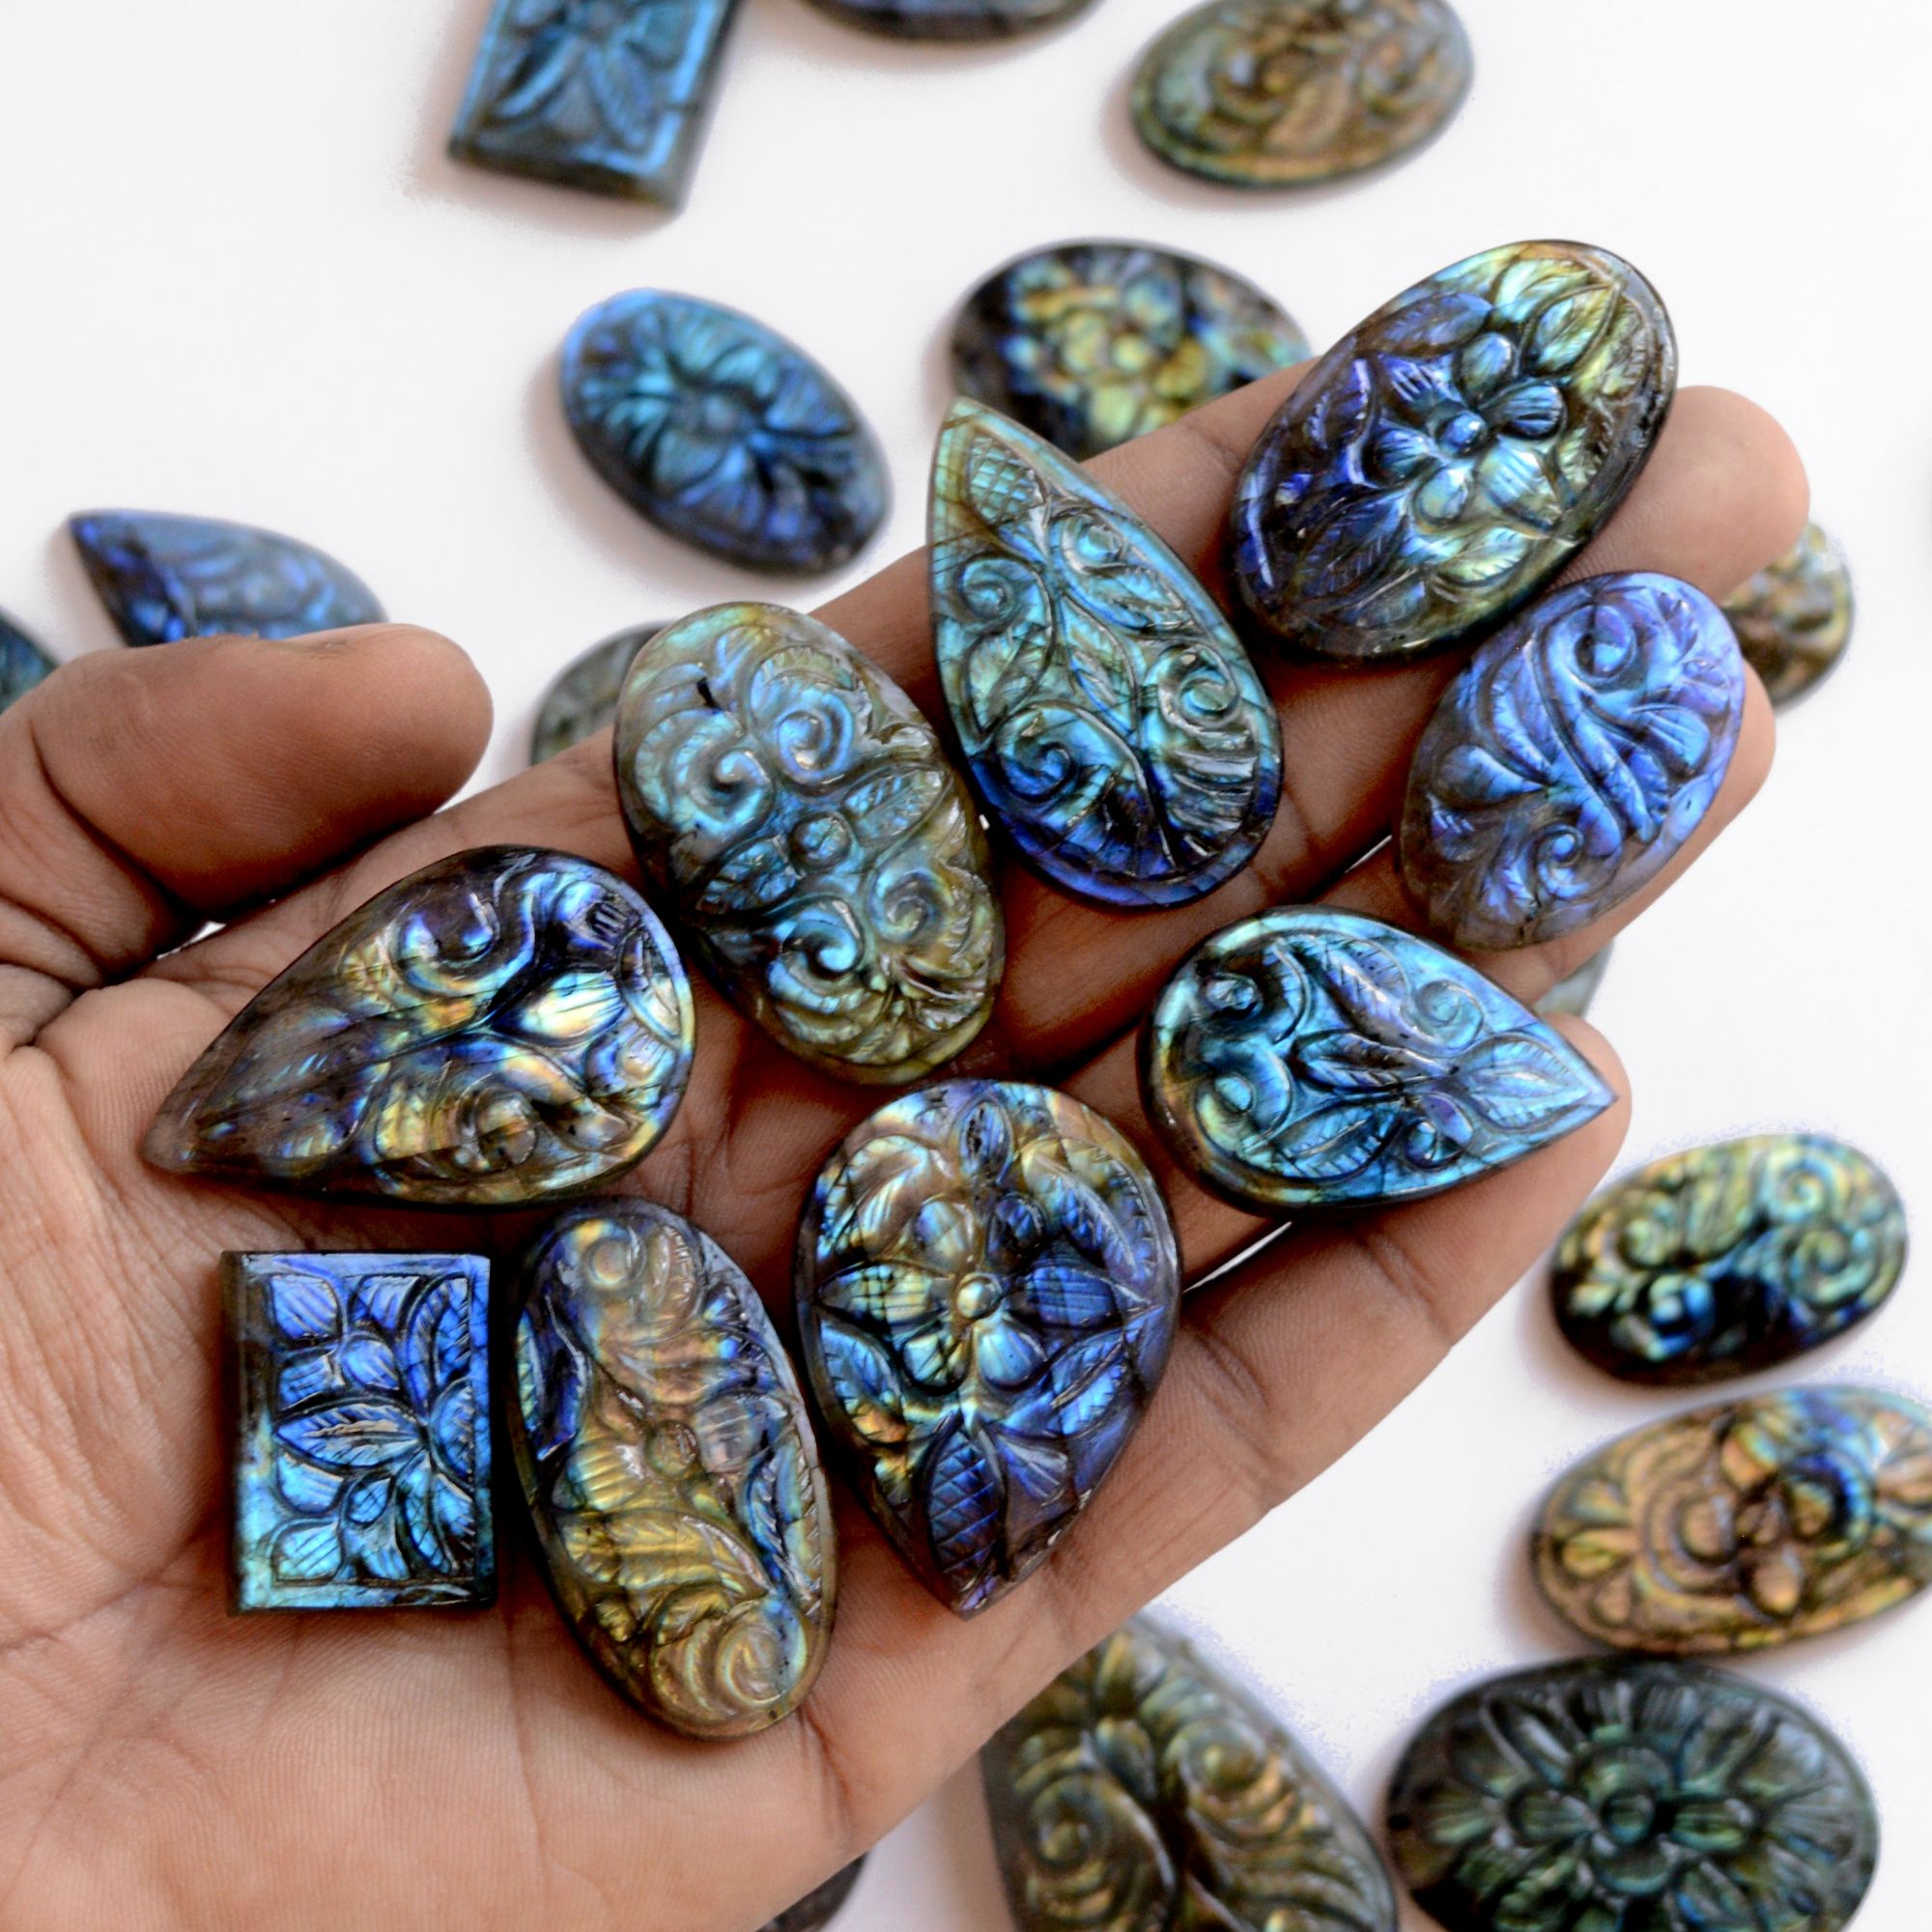 Natural Multi Fire labradorite cabochon carving gemstone mughal carved loose gemstone Wholesale Lot For Jewelry